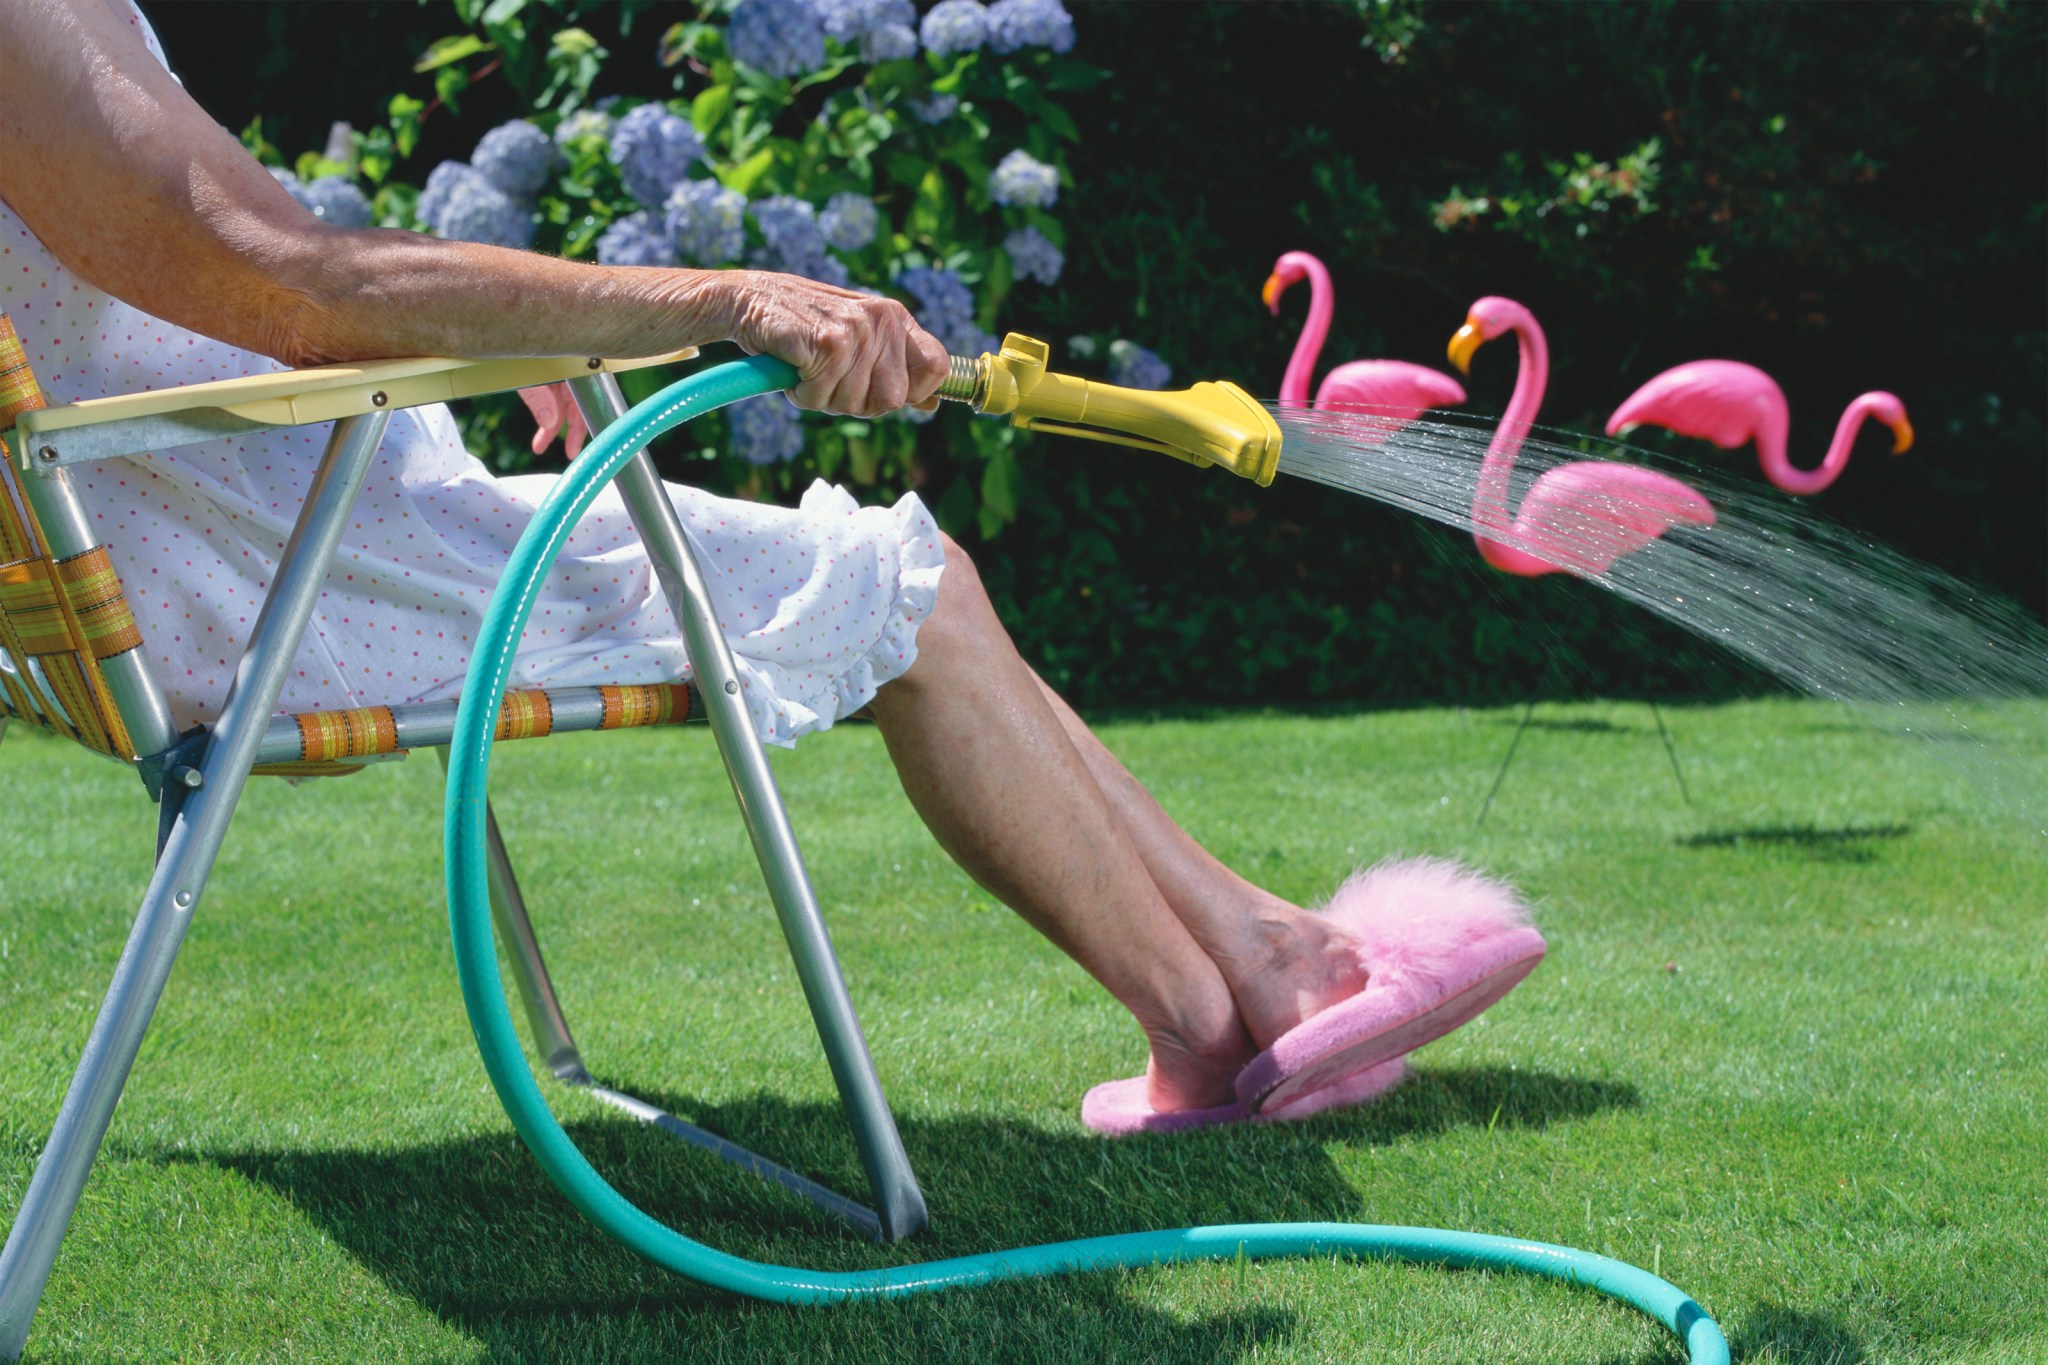 Old woman in lawn chair watering lawn with pink flamingoes